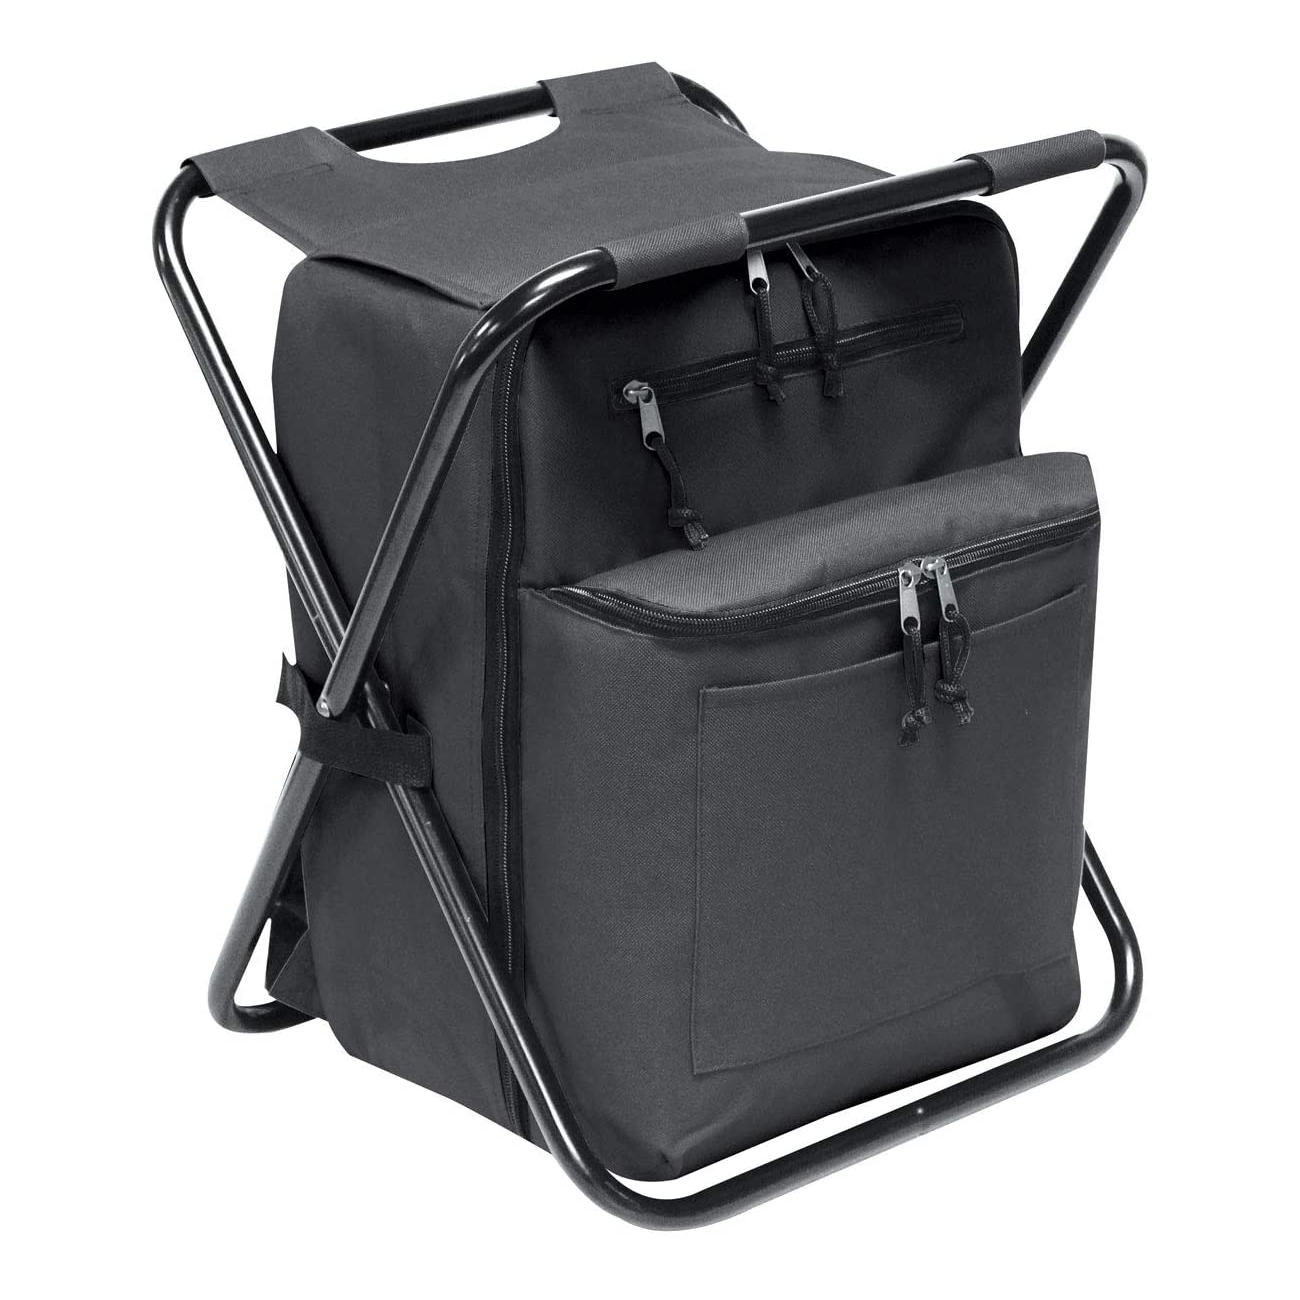 https://backpacks.global/compare/wp-content/uploads/Preferred-Nation-Seated-Cooler-Backpack.png